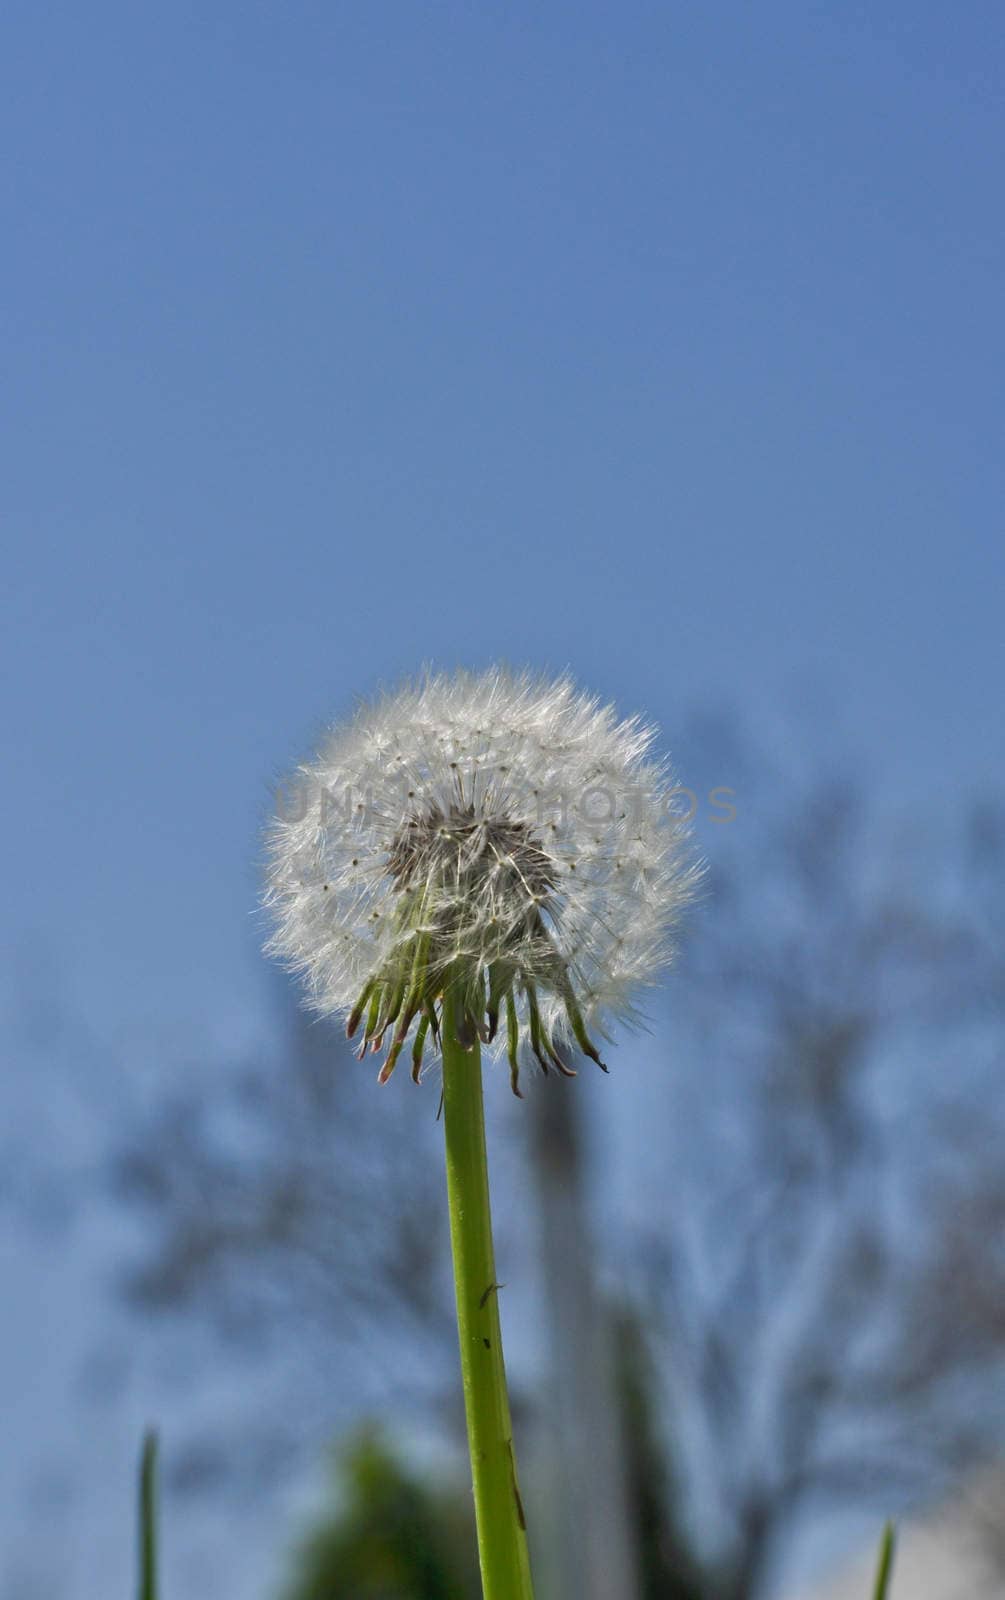 white dandelion on a background of  blue sky on a sunny day